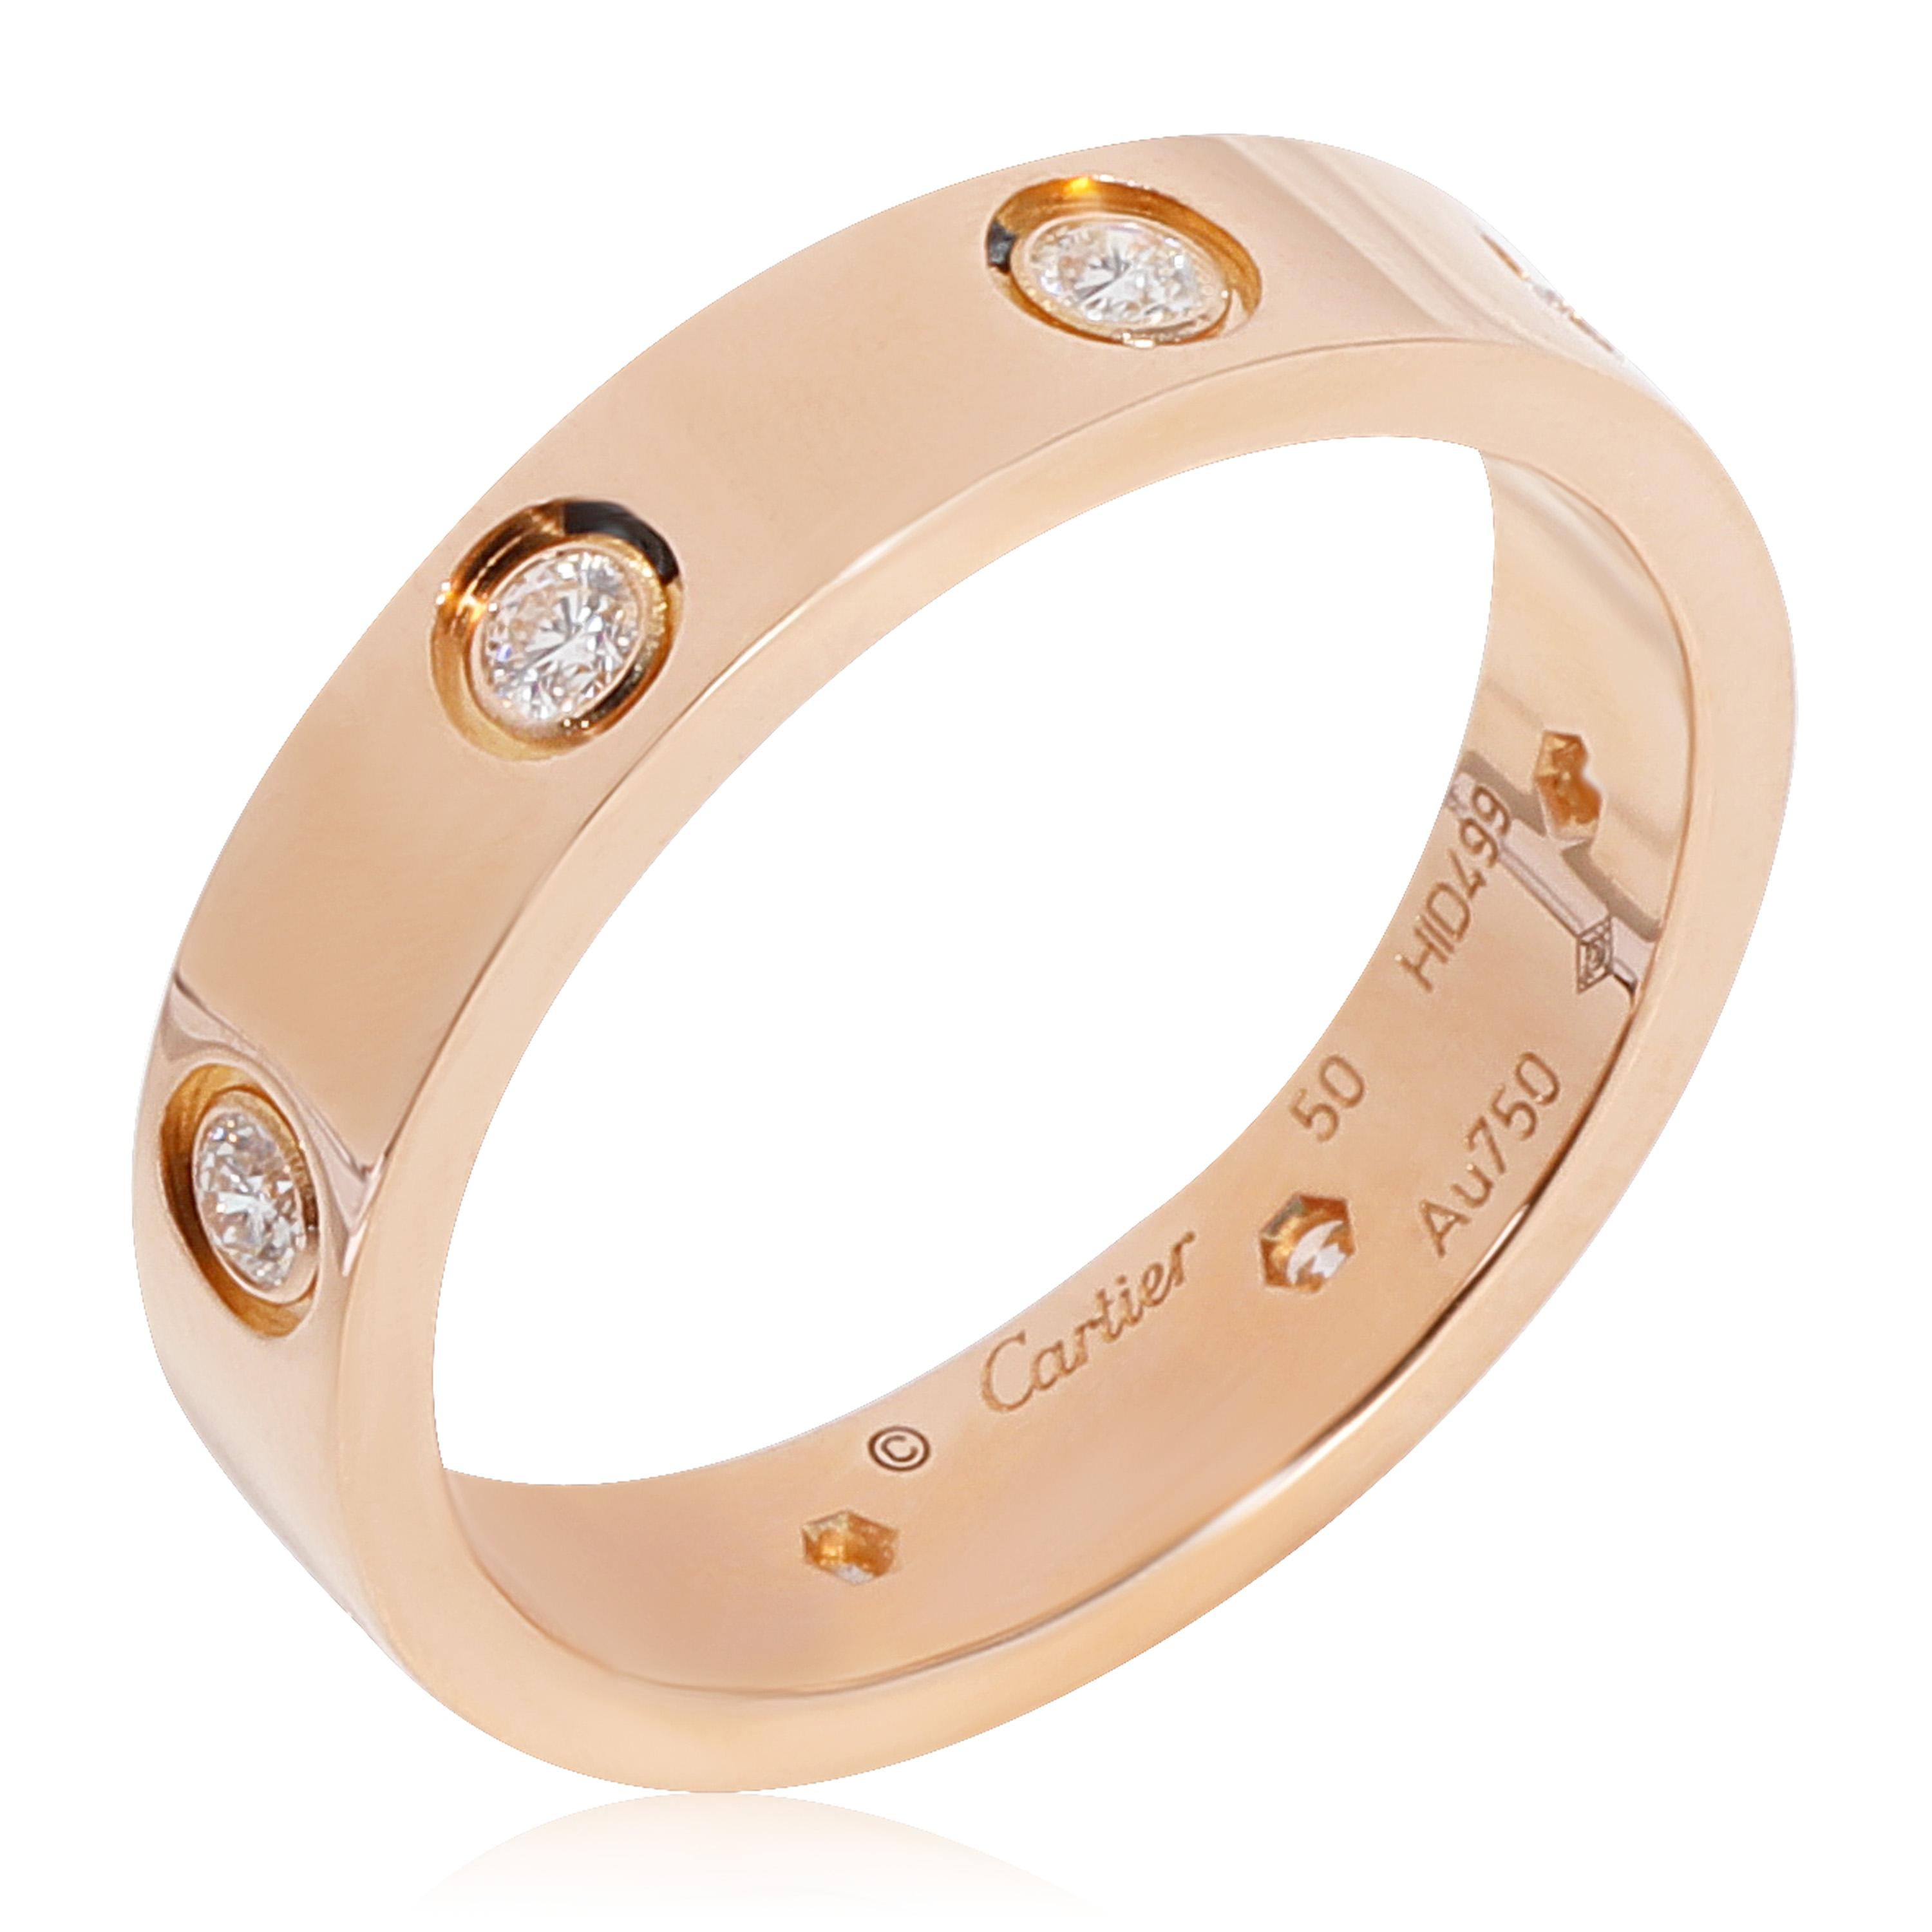 Cartier Love Diamond Wedding Band in 18k Rose Gold 0.16 CTW

PRIMARY DETAILS
SKU: 118254
Listing Title: Cartier Love Diamond Wedding Band in 18k Rose Gold 0.16 CTW
Condition Description: Retails for 3950 USD. In excellent condition and recently